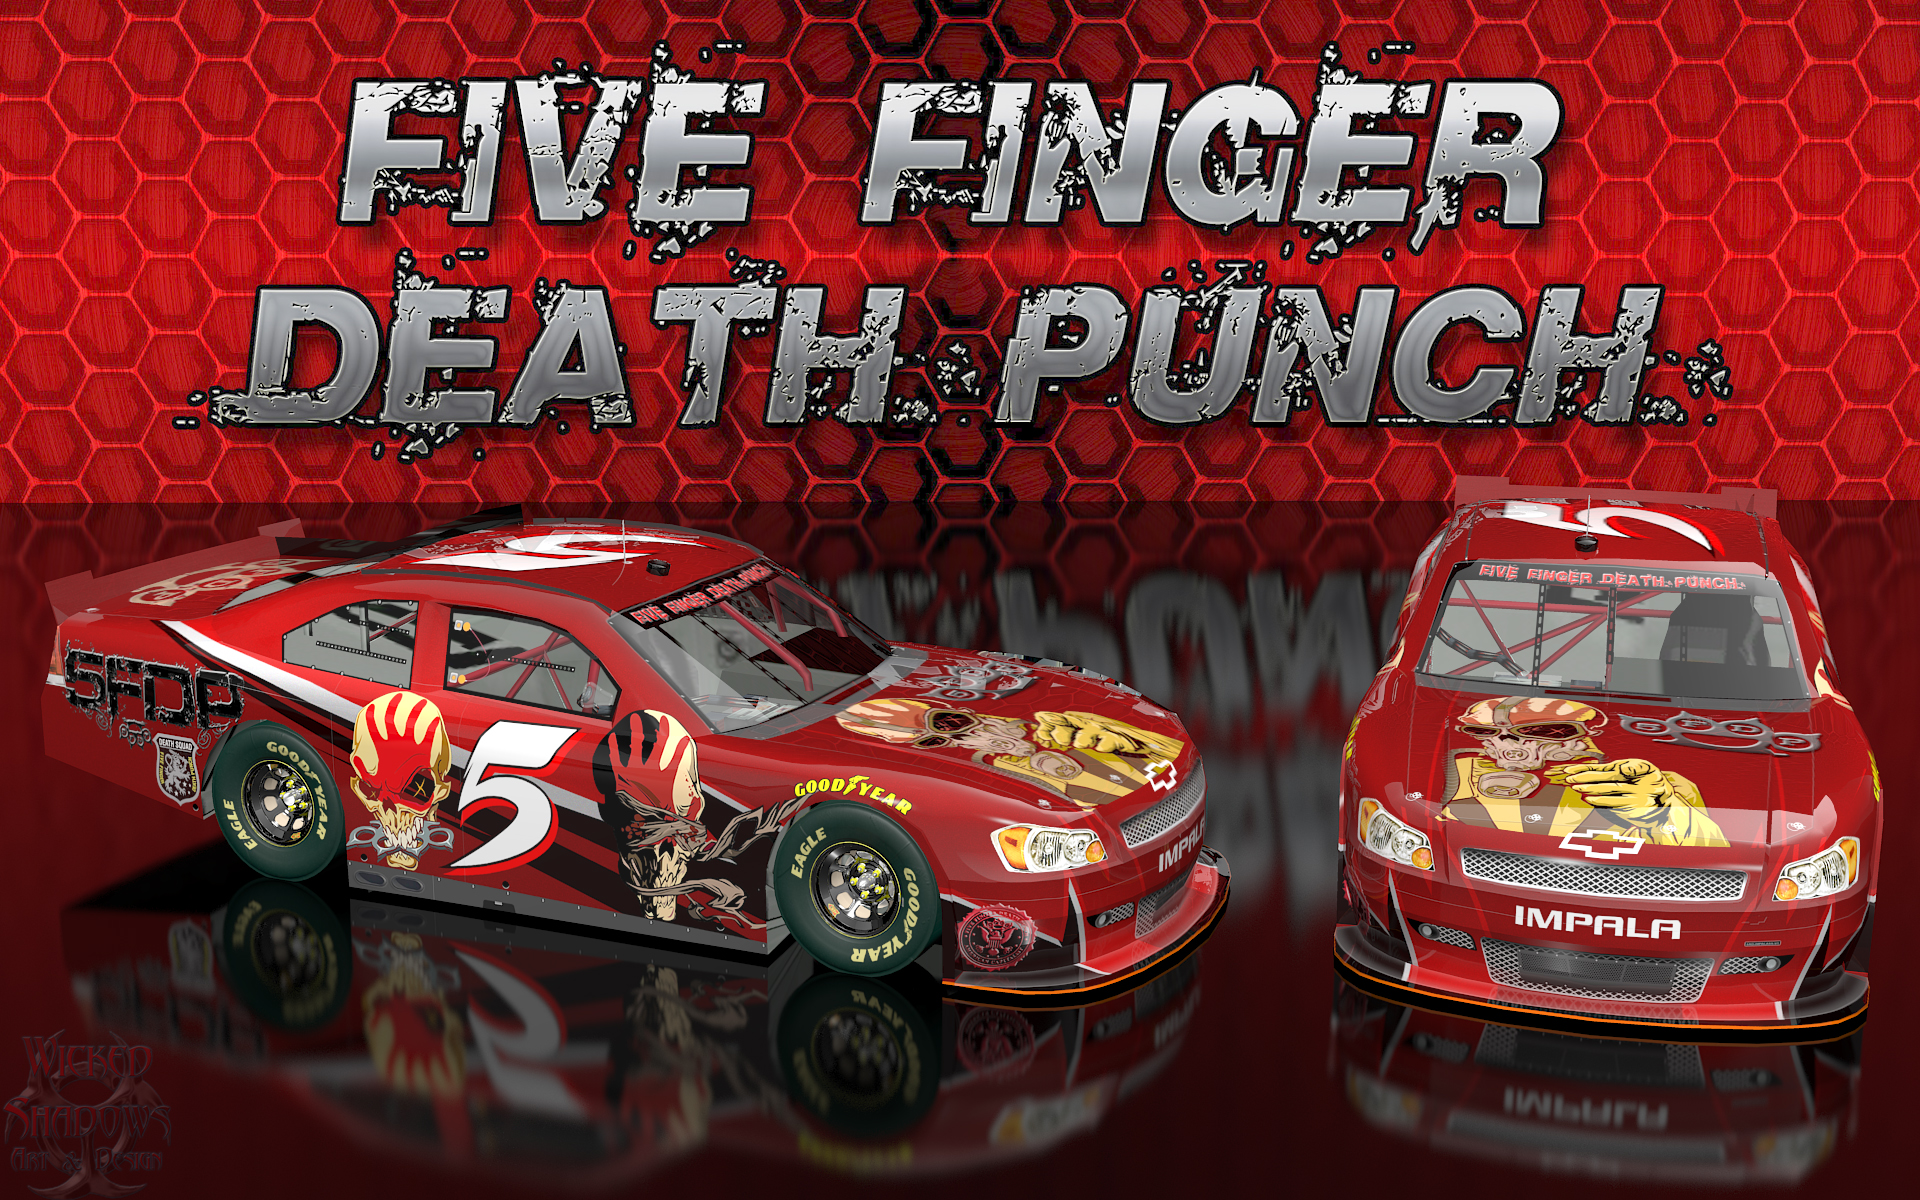 android hard rock, music, five finger death punch, death metal, heavy metal, nascar